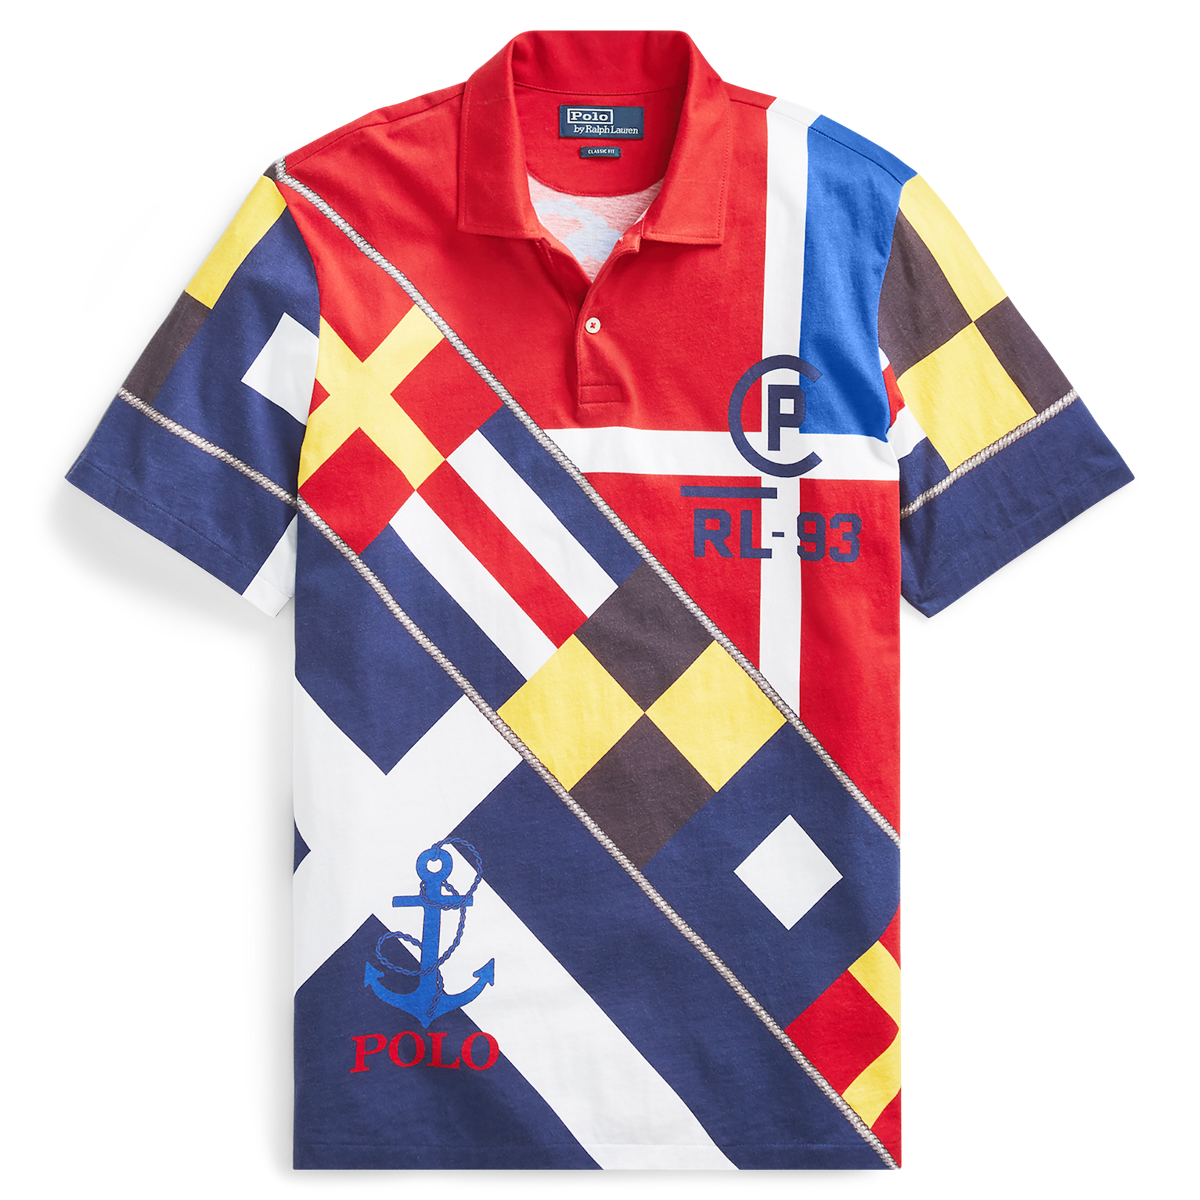 CP-93 Limited-Edition Polo